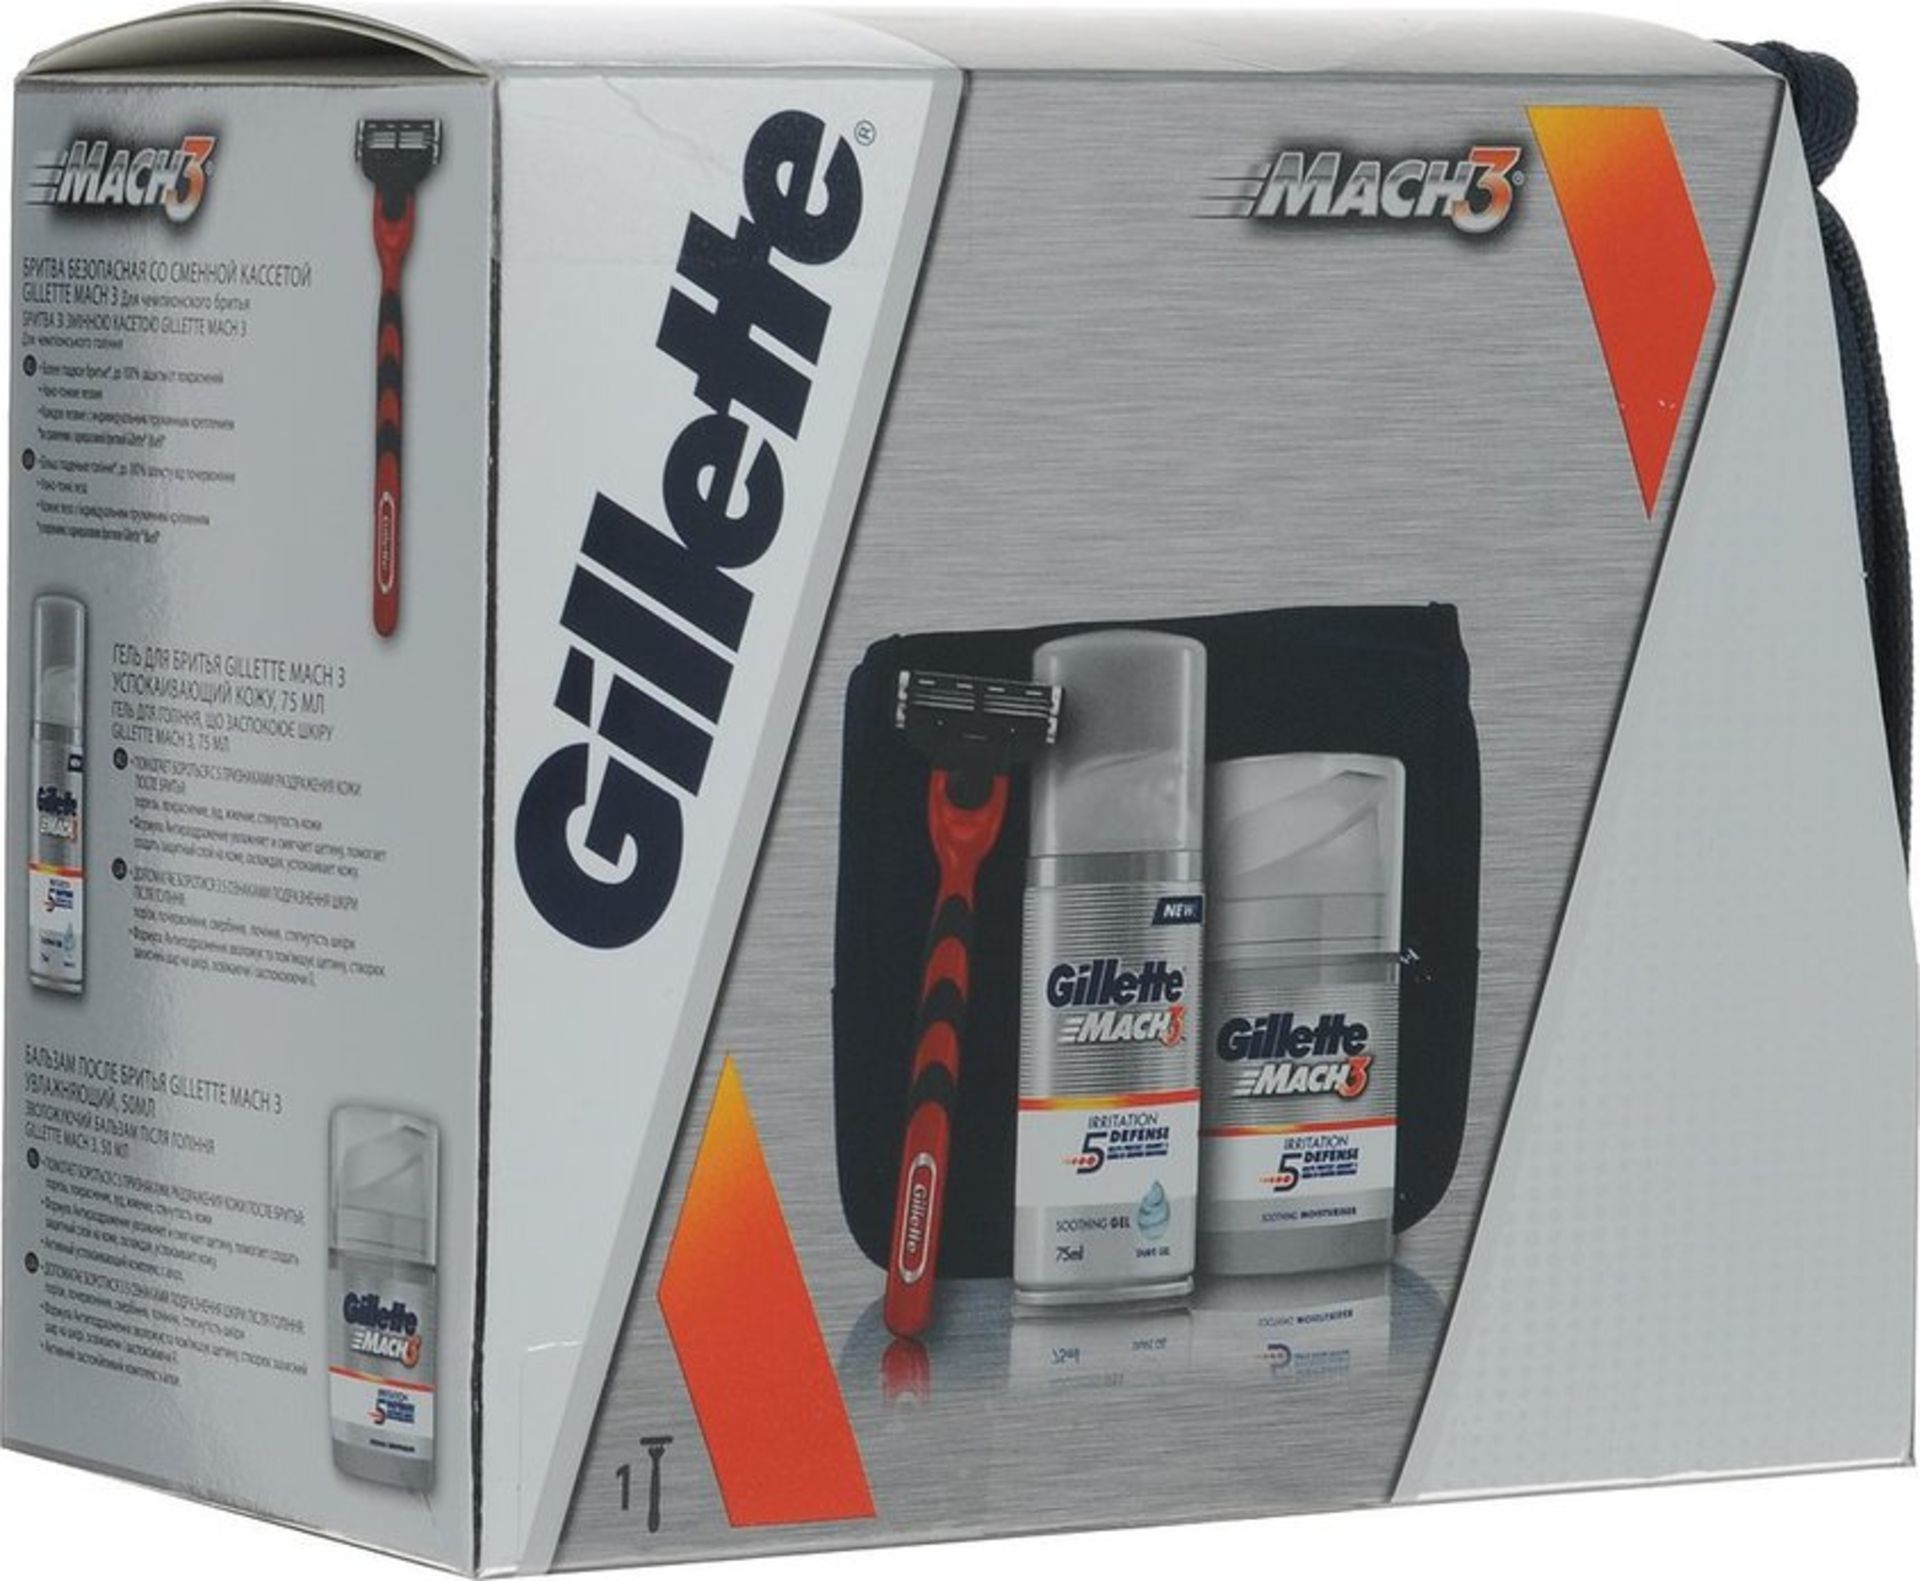 V Brand New Gillette Mach 3 Razor Set In Washbag X 2 YOUR BID PRICE TO BE MULTIPLIED BY TWO